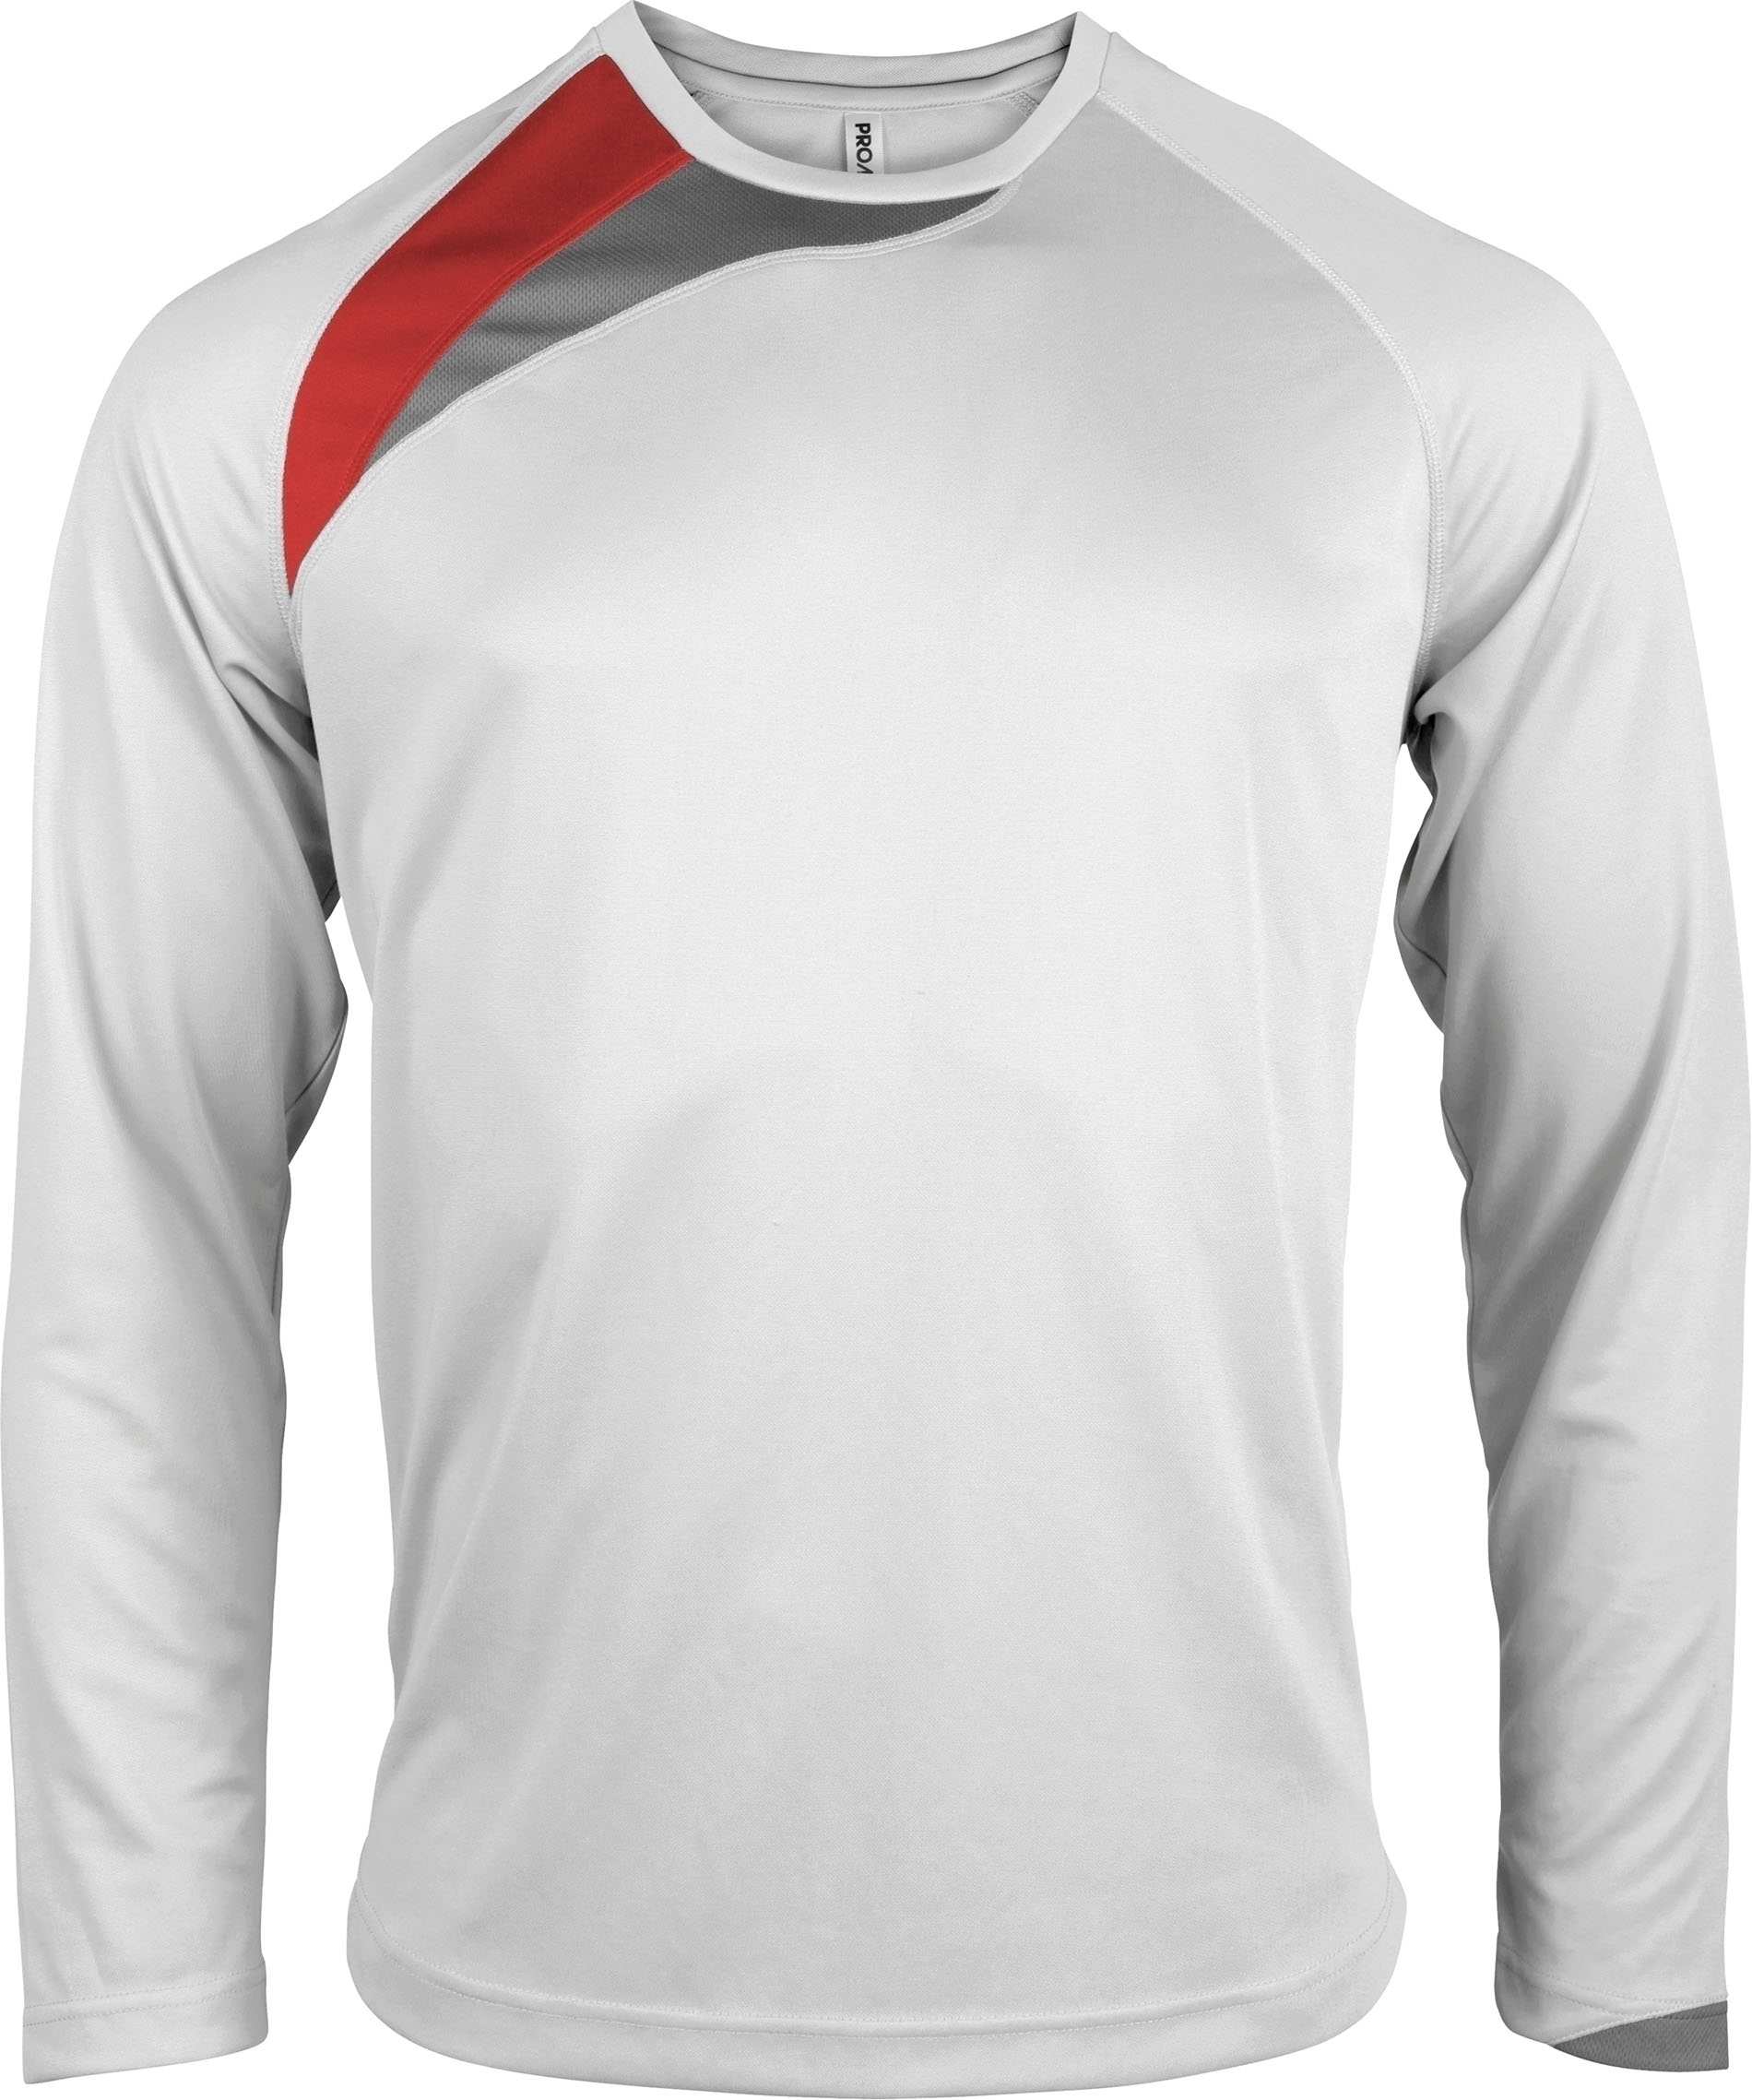 MAILLOT MANCHES LONGUES ADULTE White / Sporty Red / Storm Grey Blanc